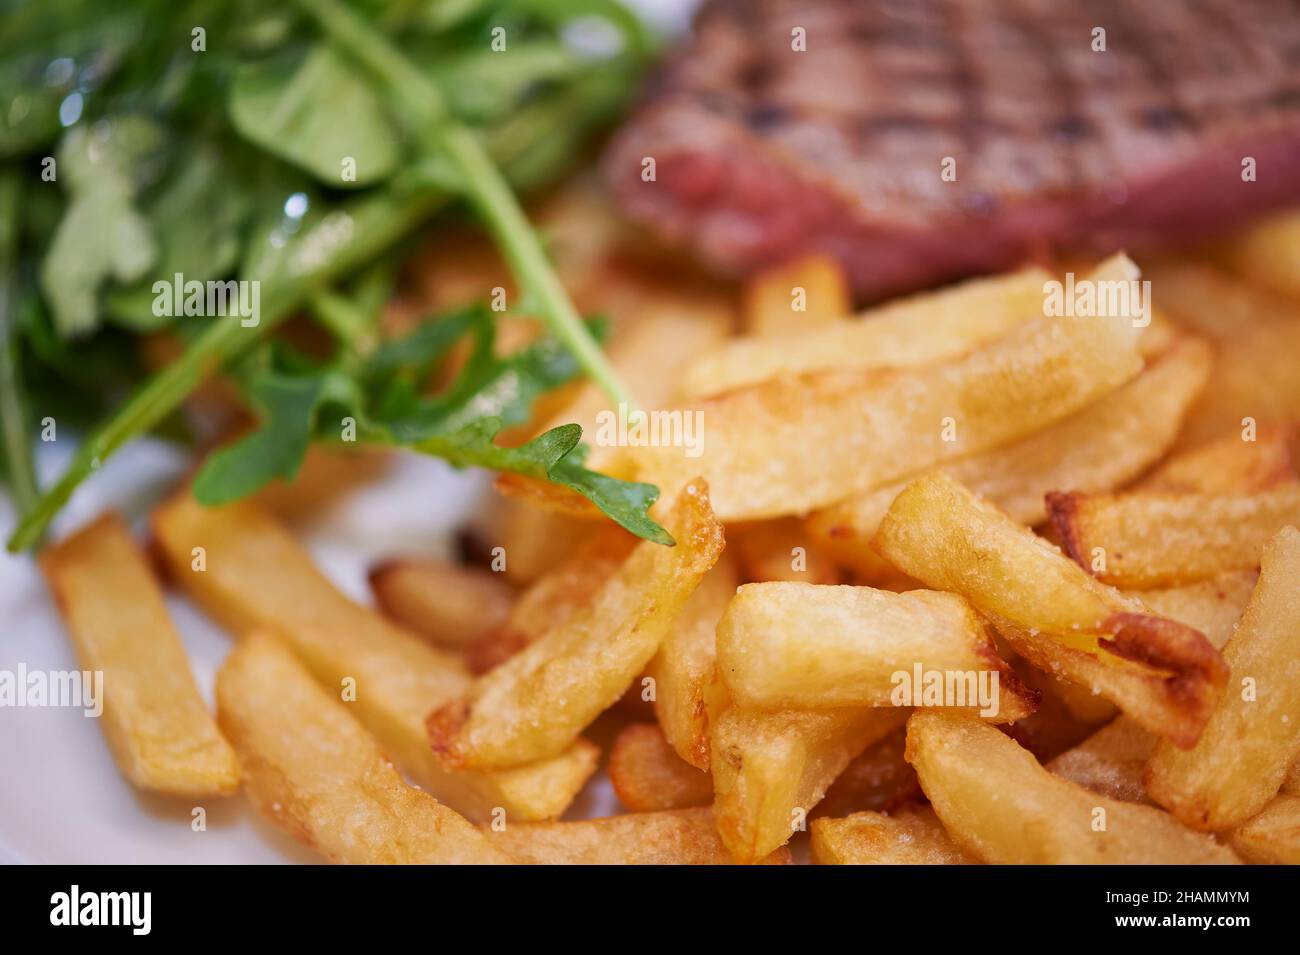 Steak and Chips Stock Photo